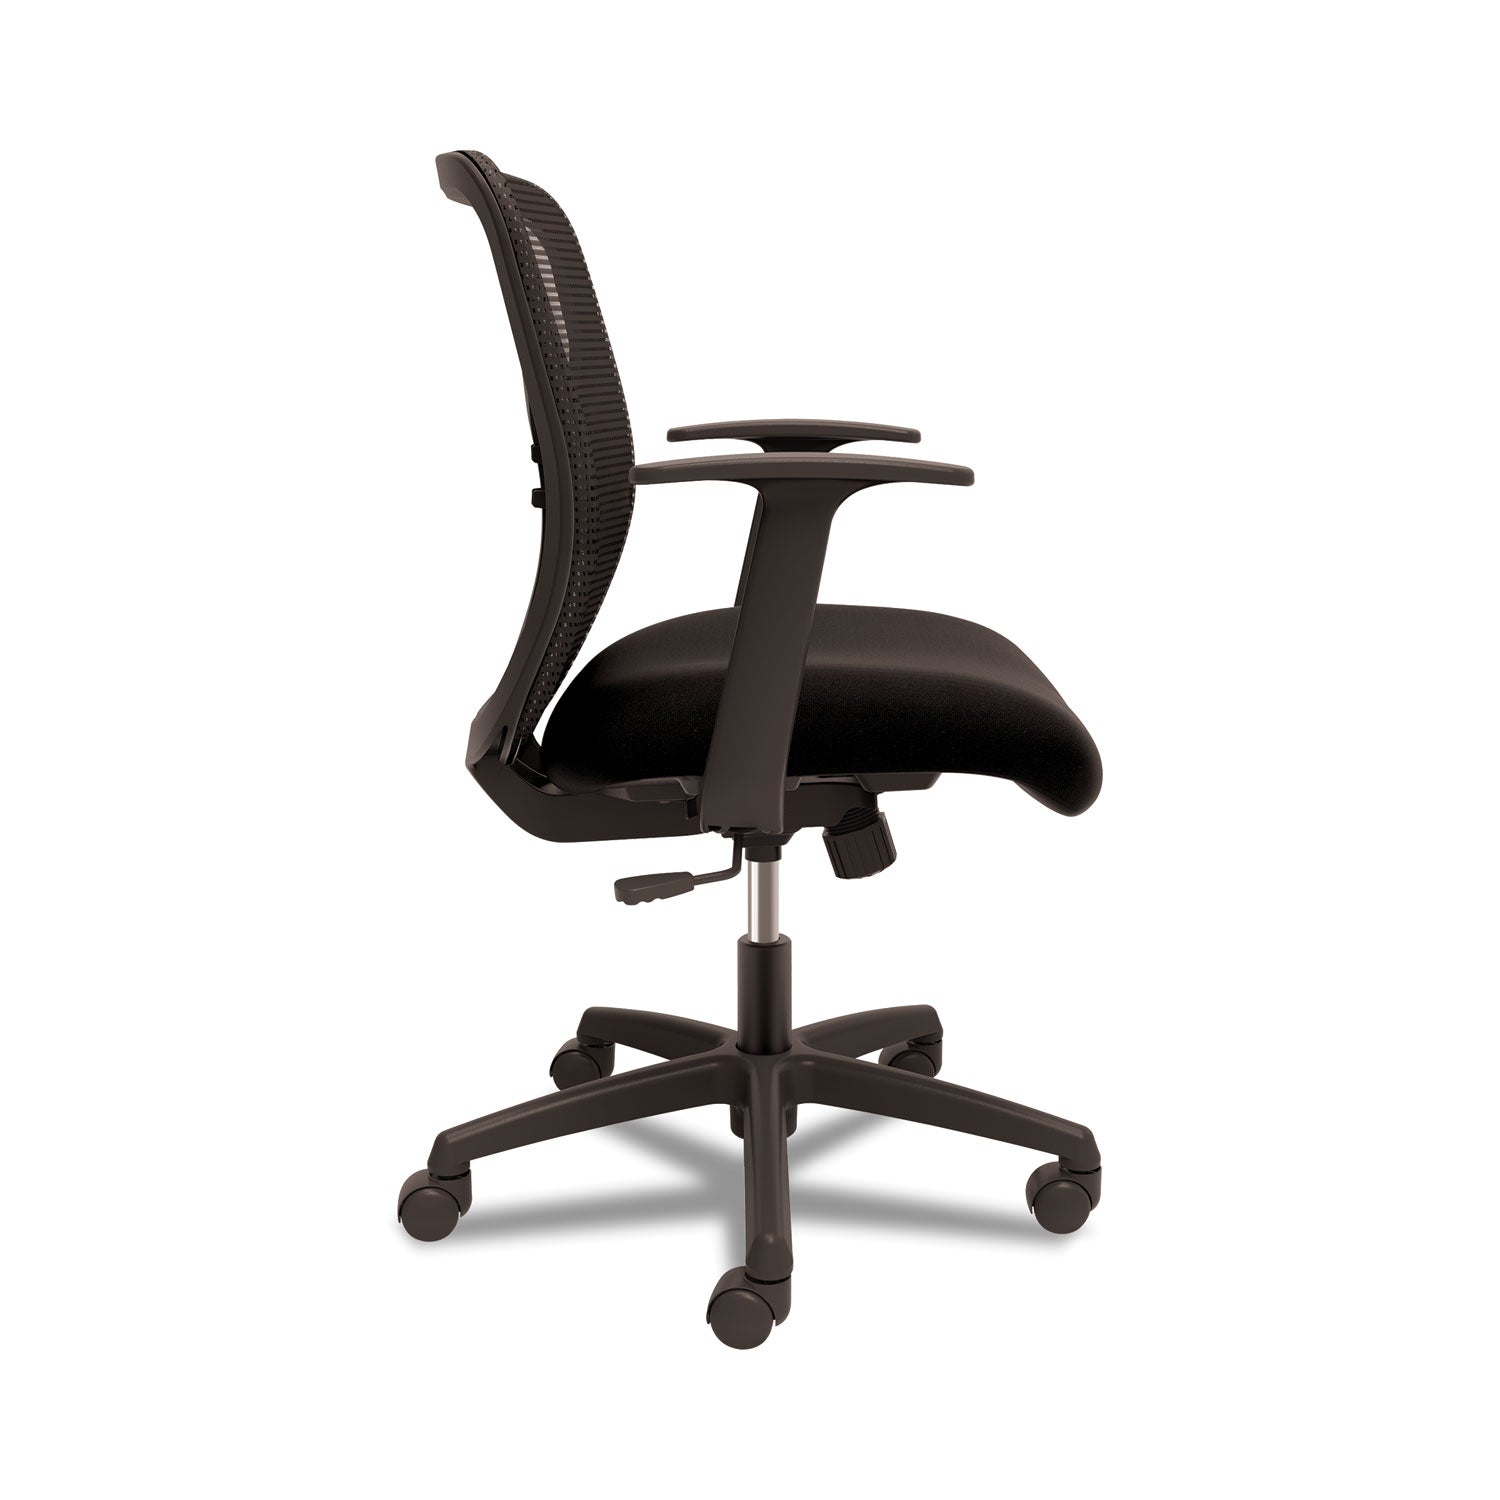 gateway-mid-back-task-chair-supports-up-to-250-lb-17-to-22-seat-height-black_hongvfmz1accf10 - 3